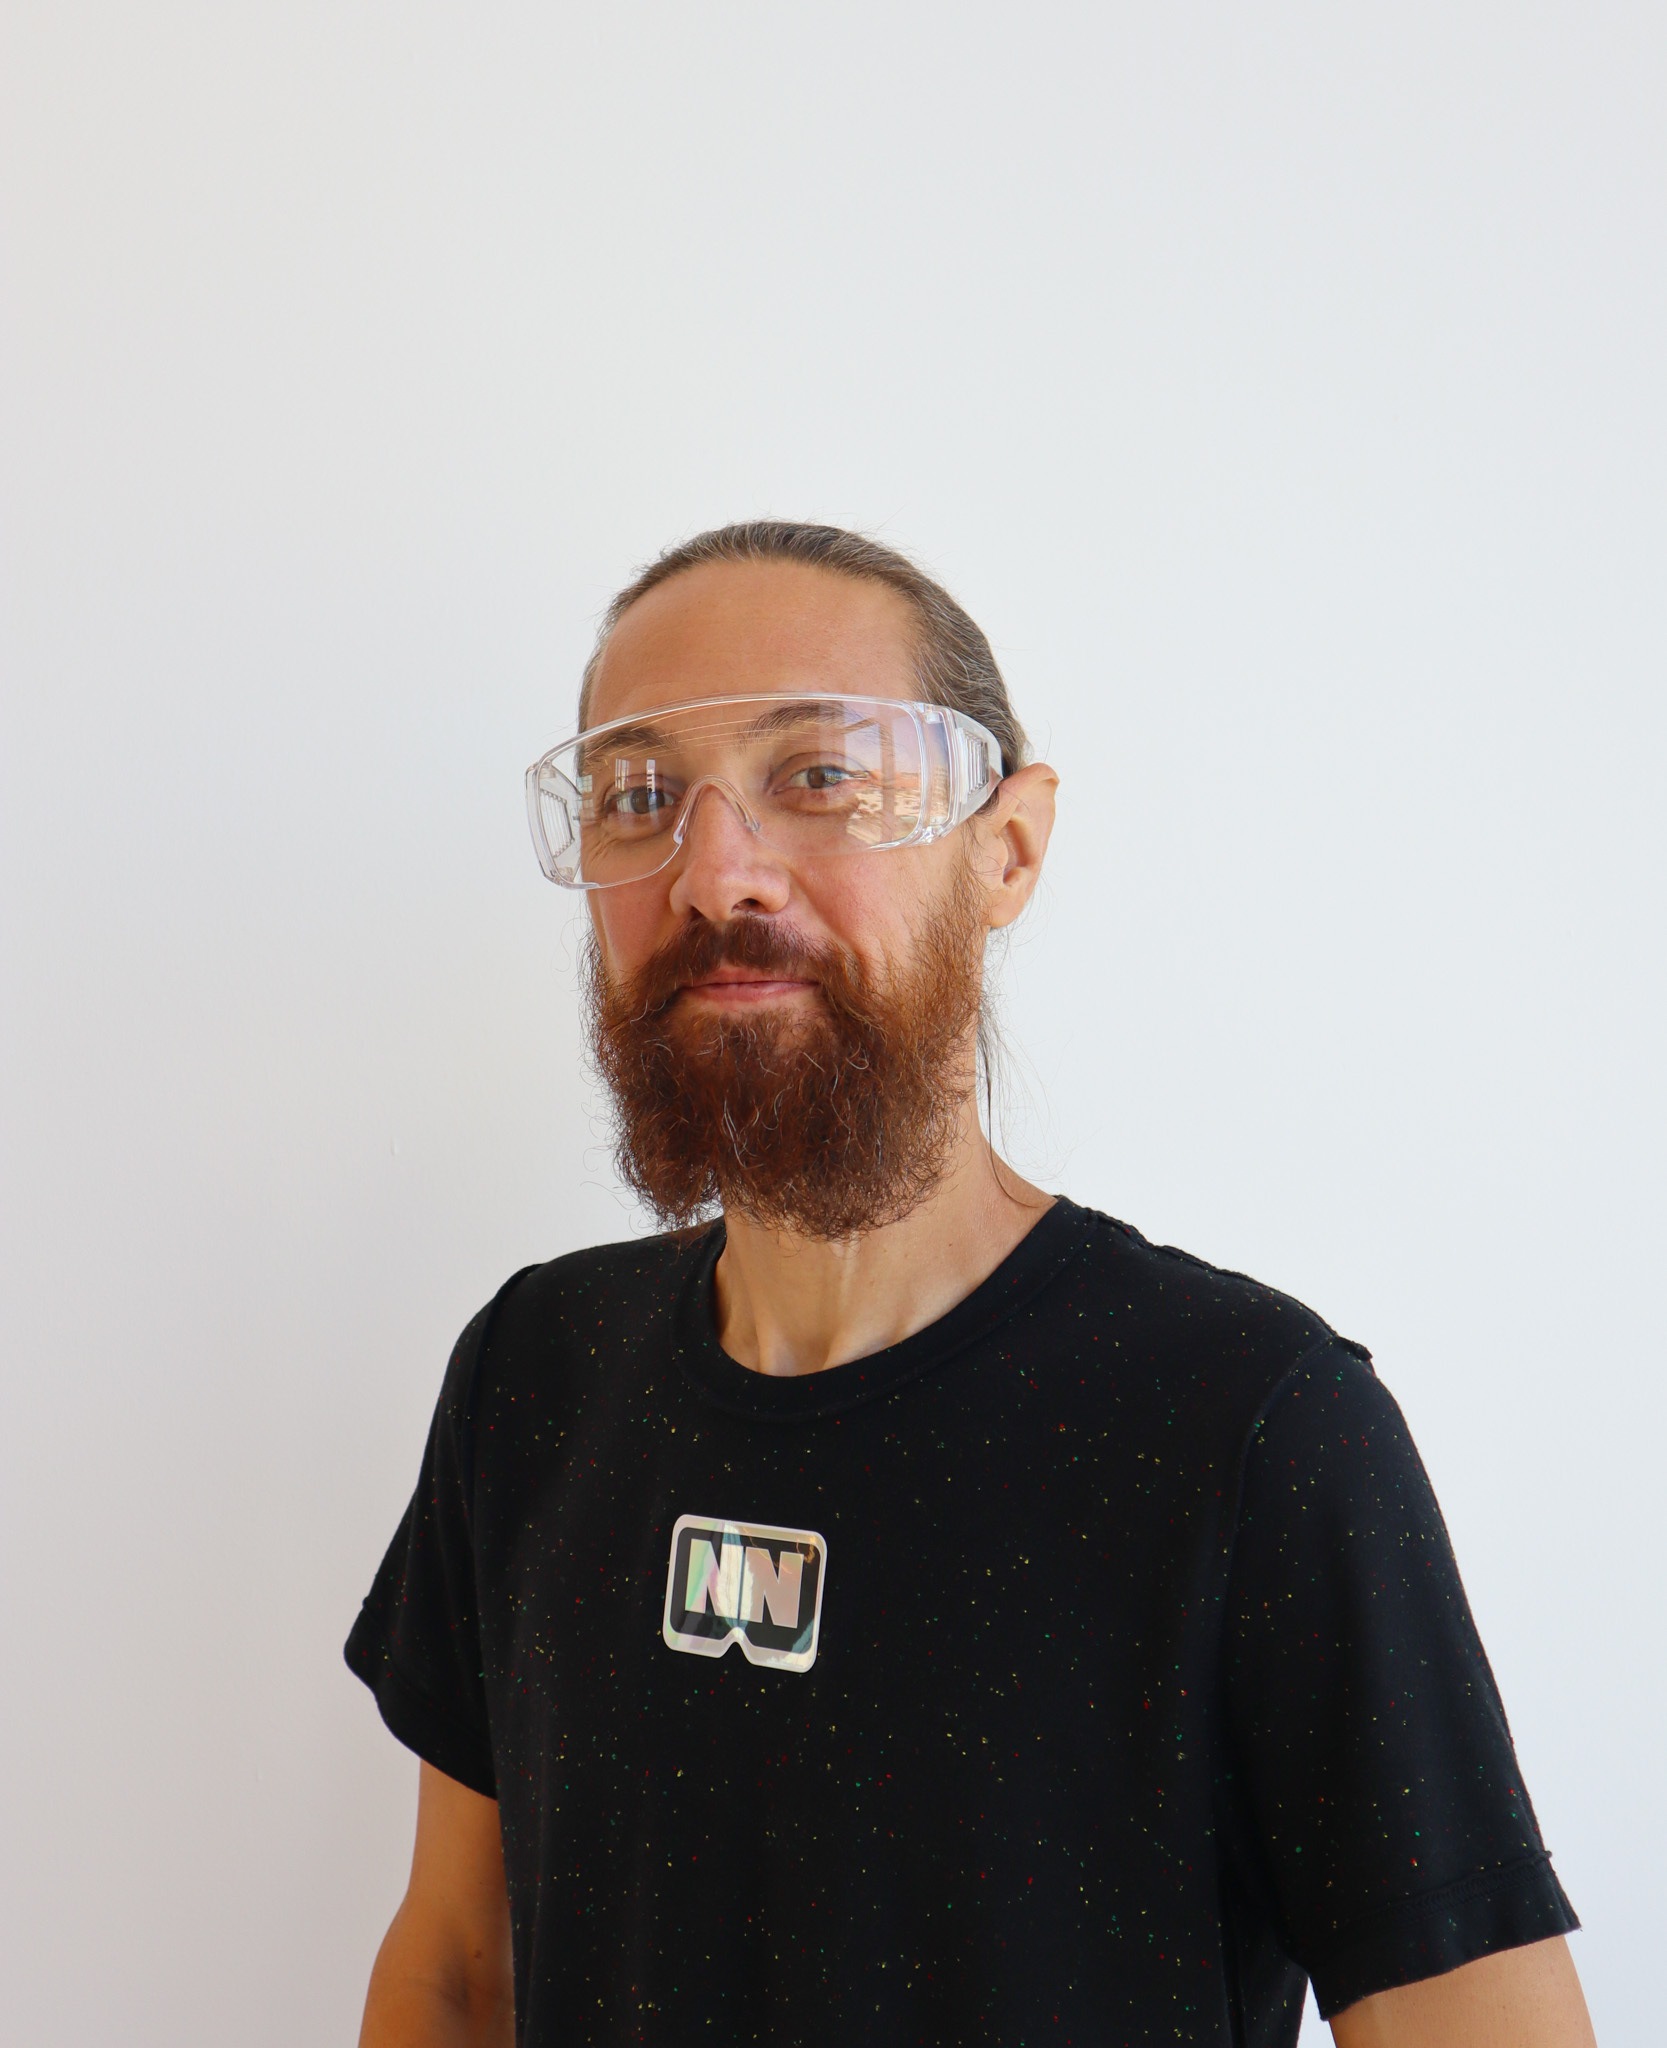 A person smiles softly at the camera, standing against a white wall. He has on large clear glasses and is wearing a dark shirt. His brown hair is pulled back, and he has a thick brown beard.